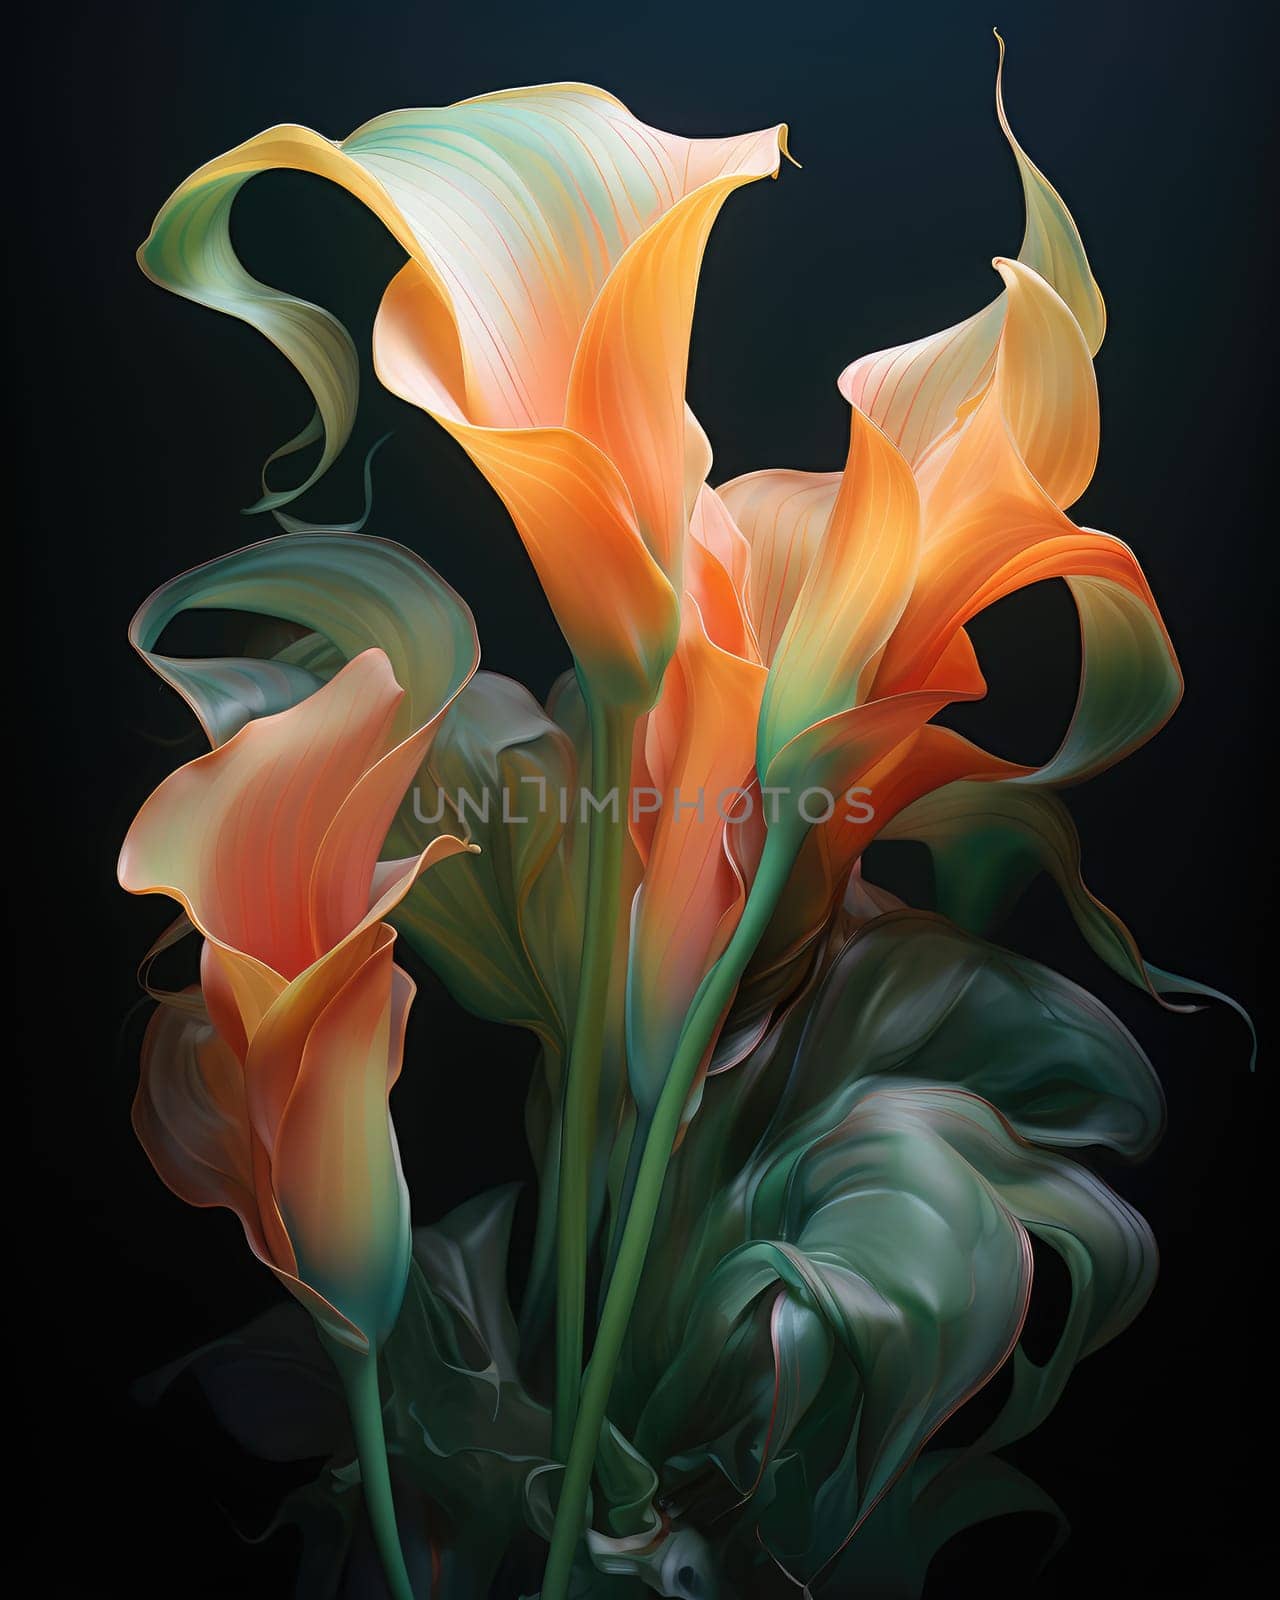 Bouquet of Calla lily over black background by palinchak